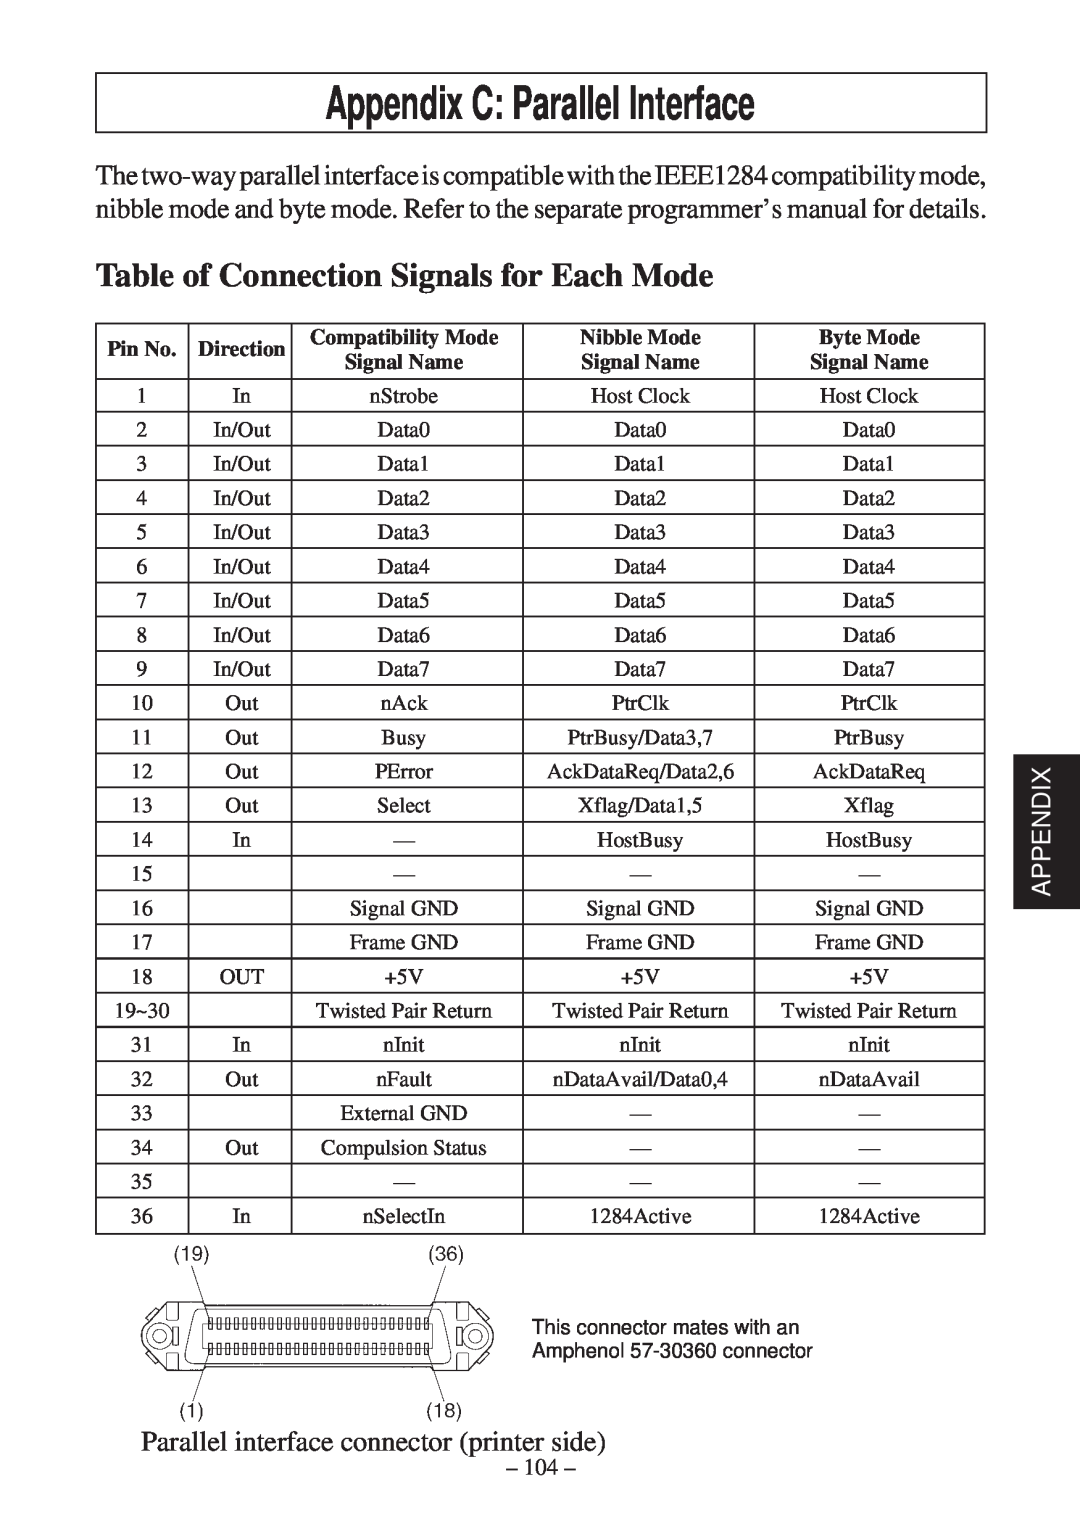 Star Micronics TSP600 Appendix C Parallel Interface, Table of Connection Signals for Each Mode, Pin No, Compatibility Mode 